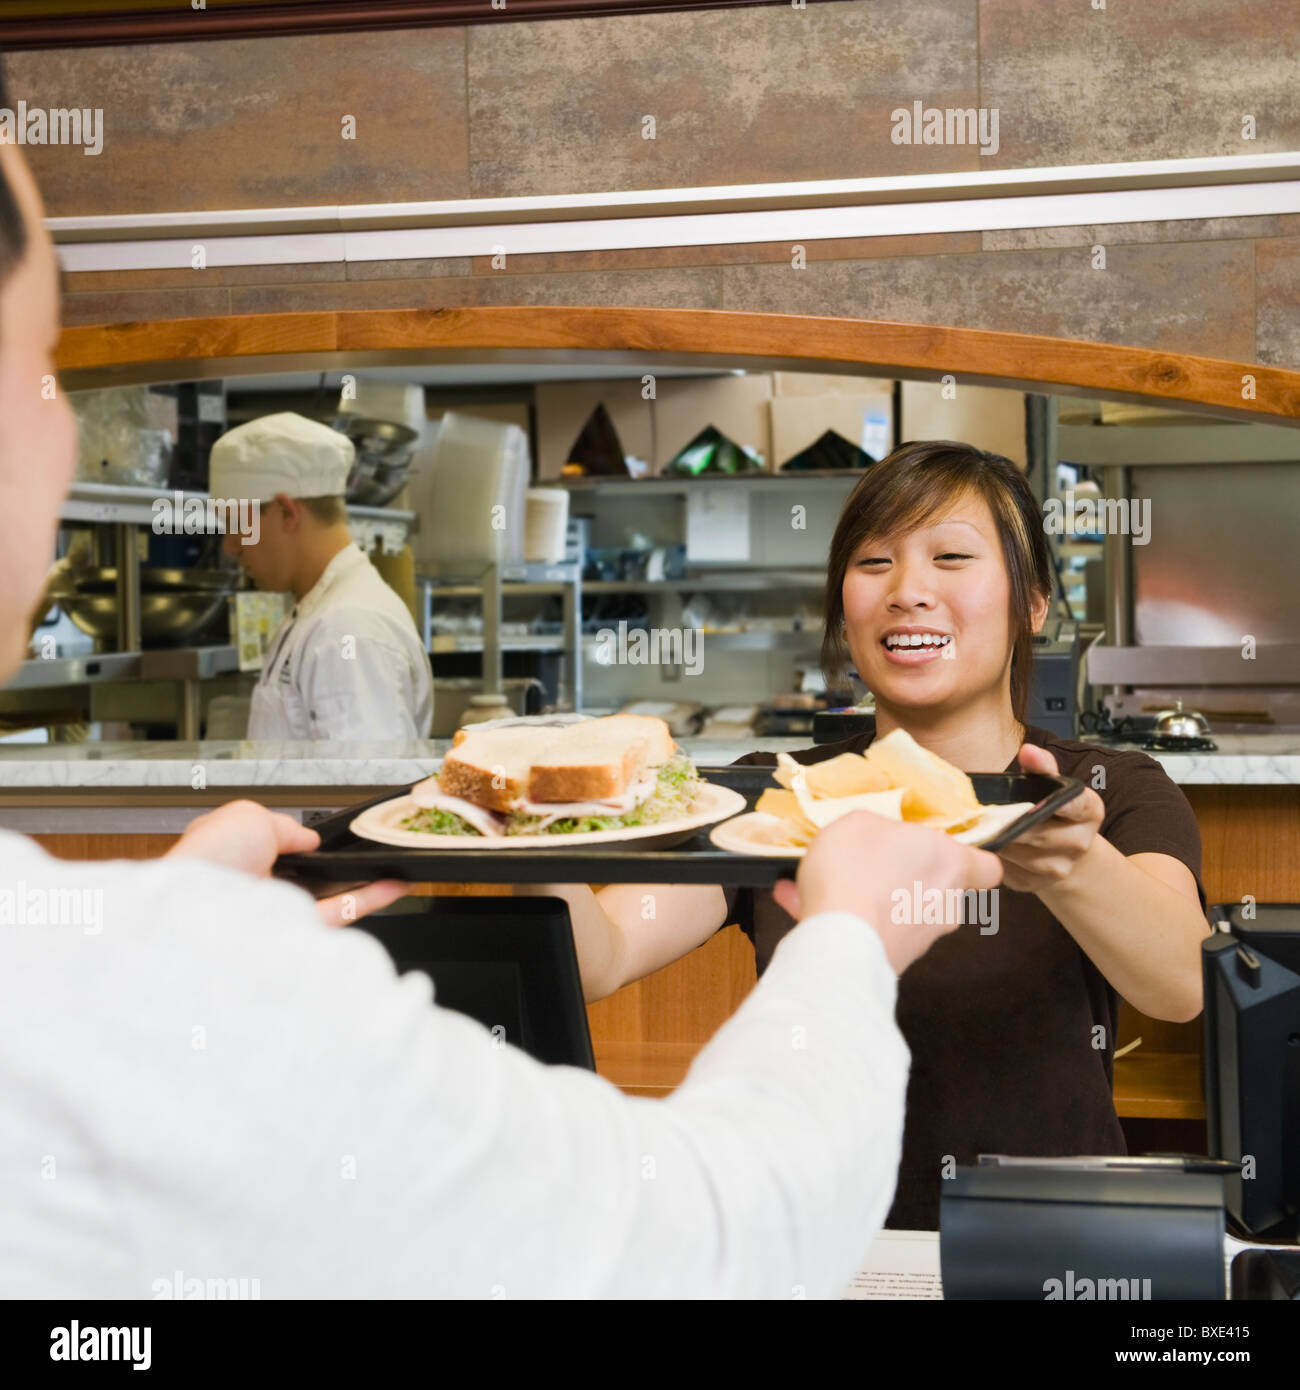 Customer receiving tray of food in bakery Stock Photo